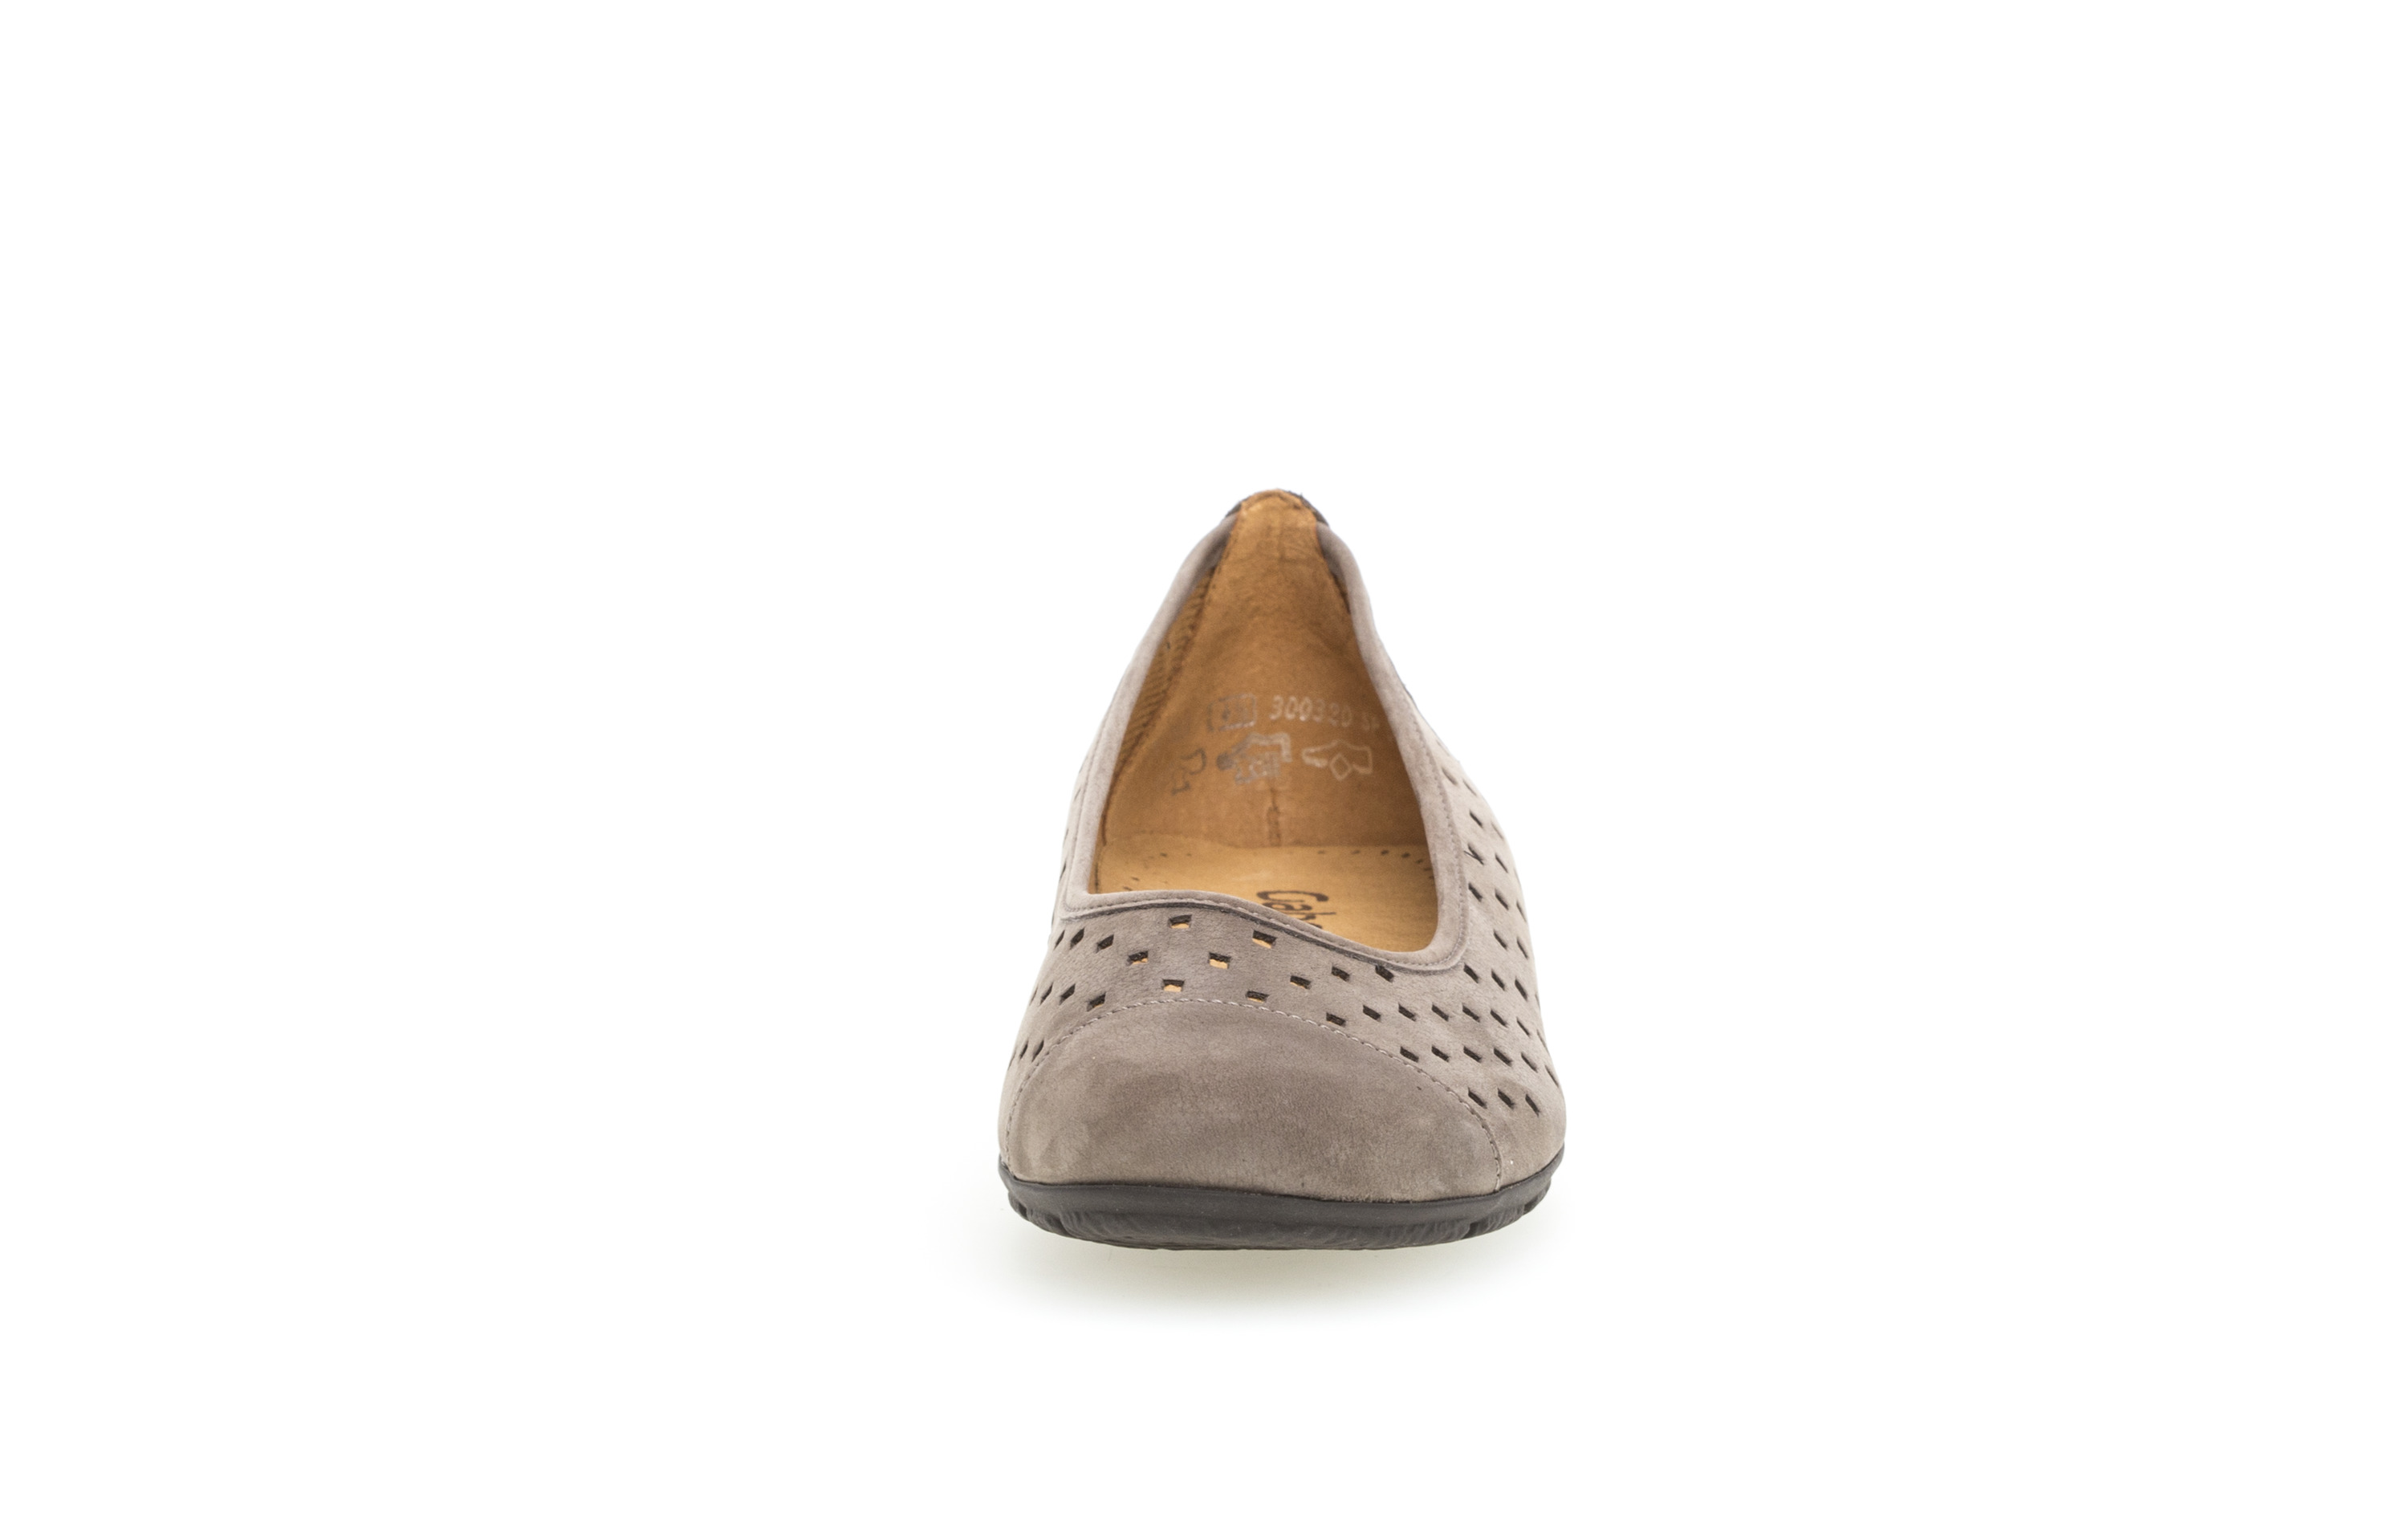 Gabor Shoes Ballerina - Brown suede leather